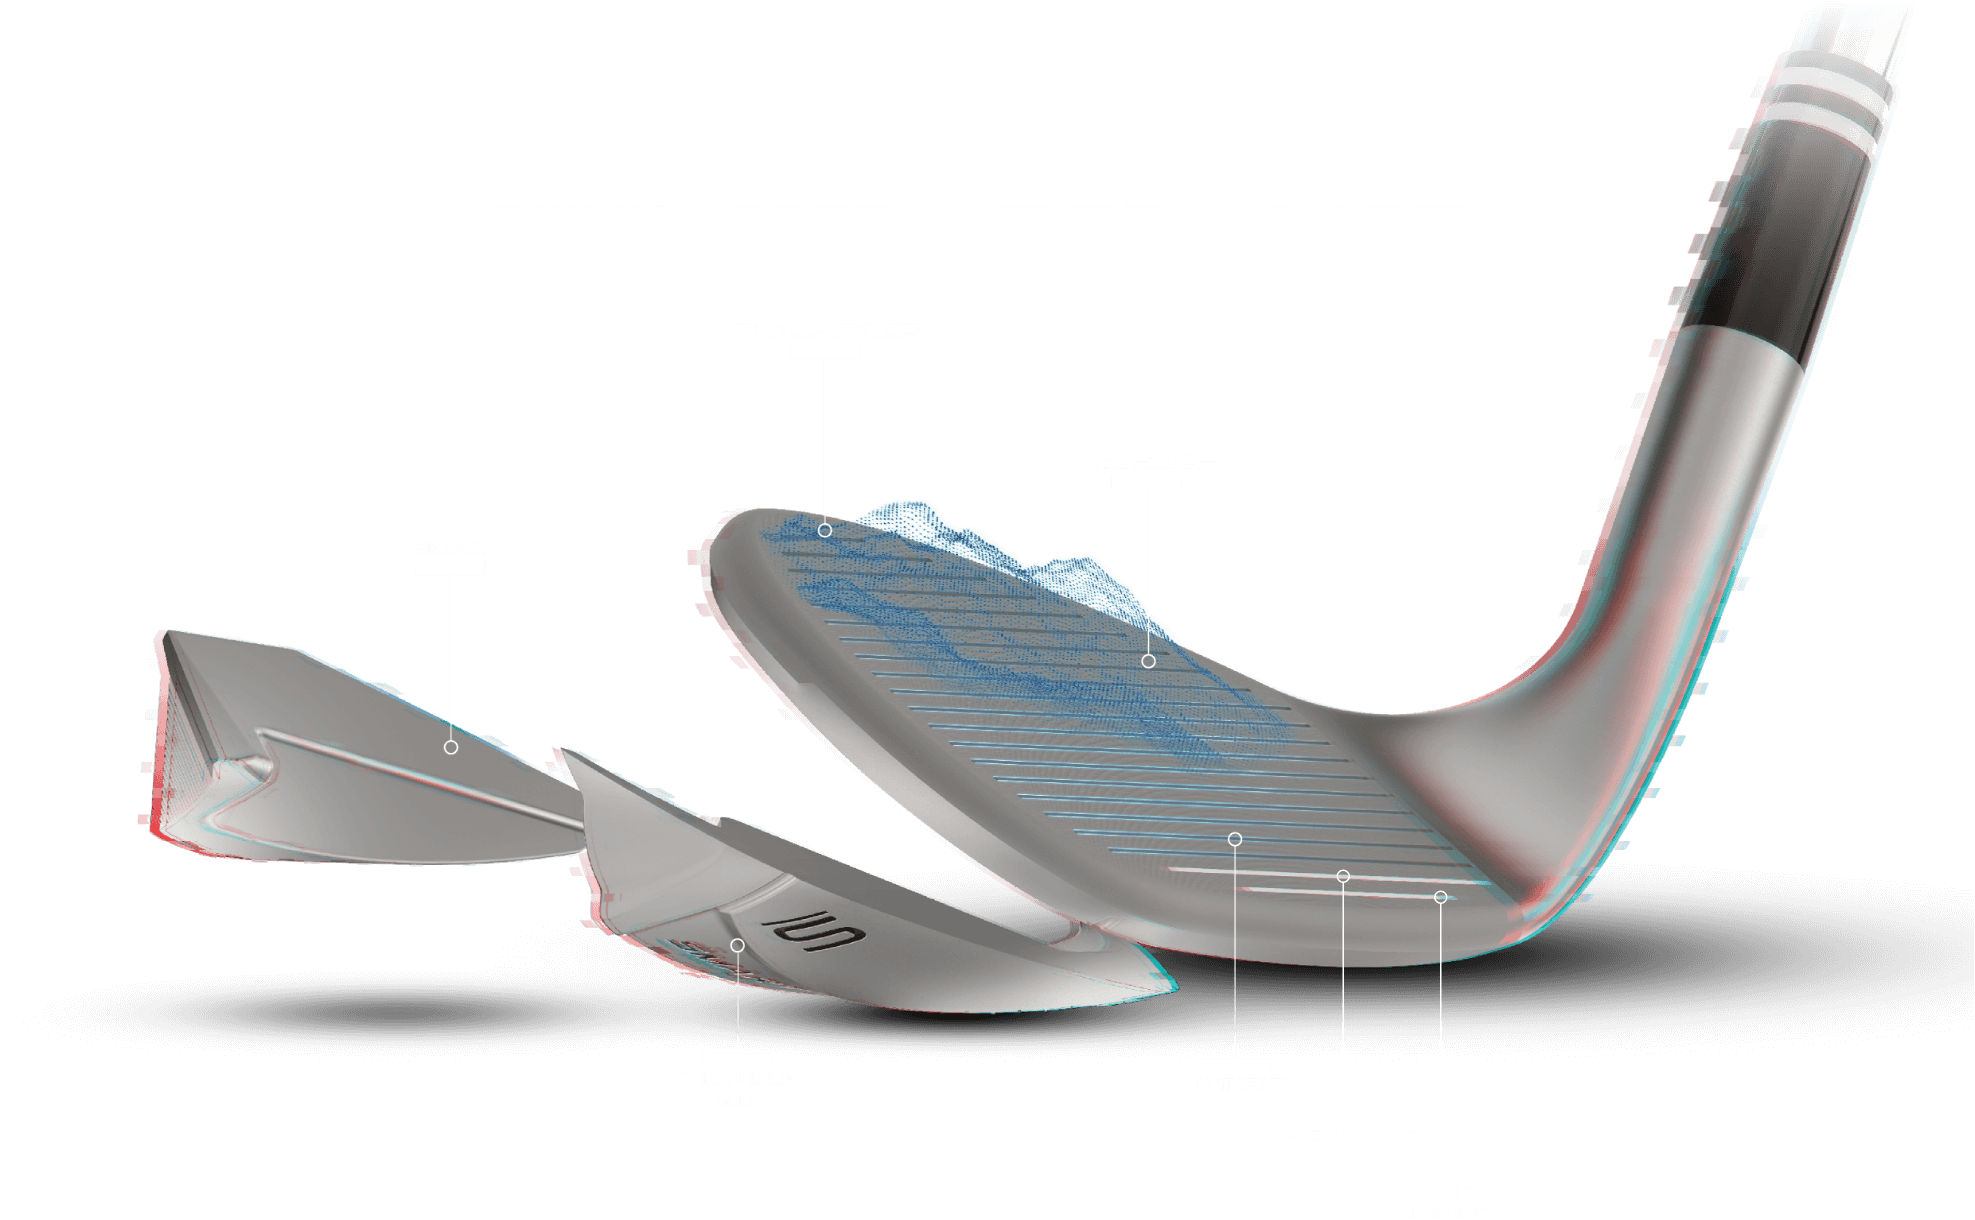 Smart Sole Full-Face Technology Overview